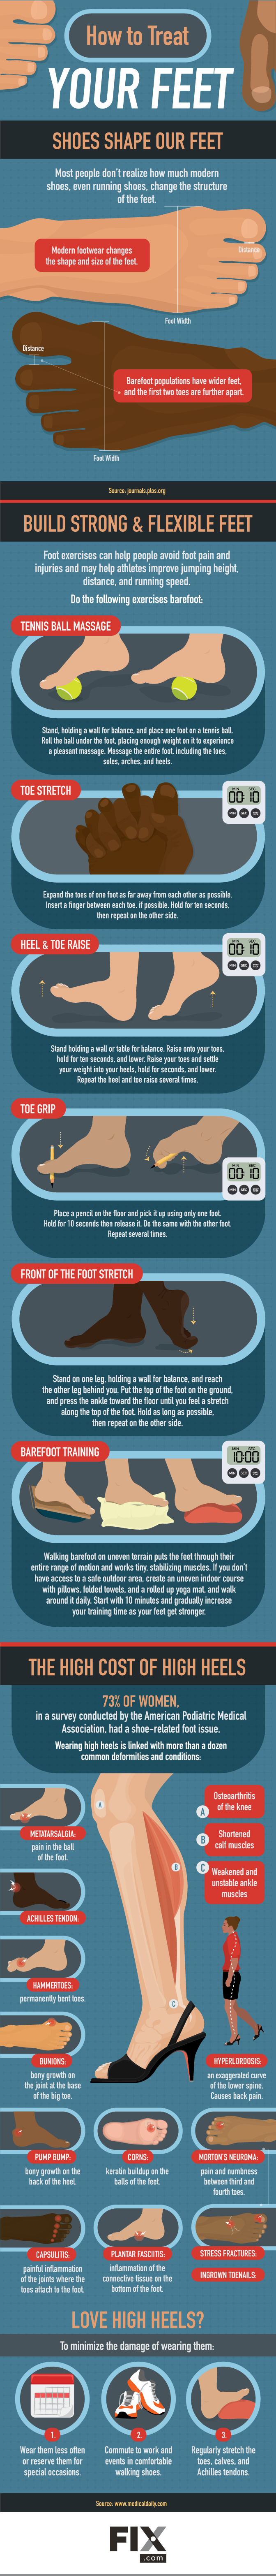 How to treat your feet infographic